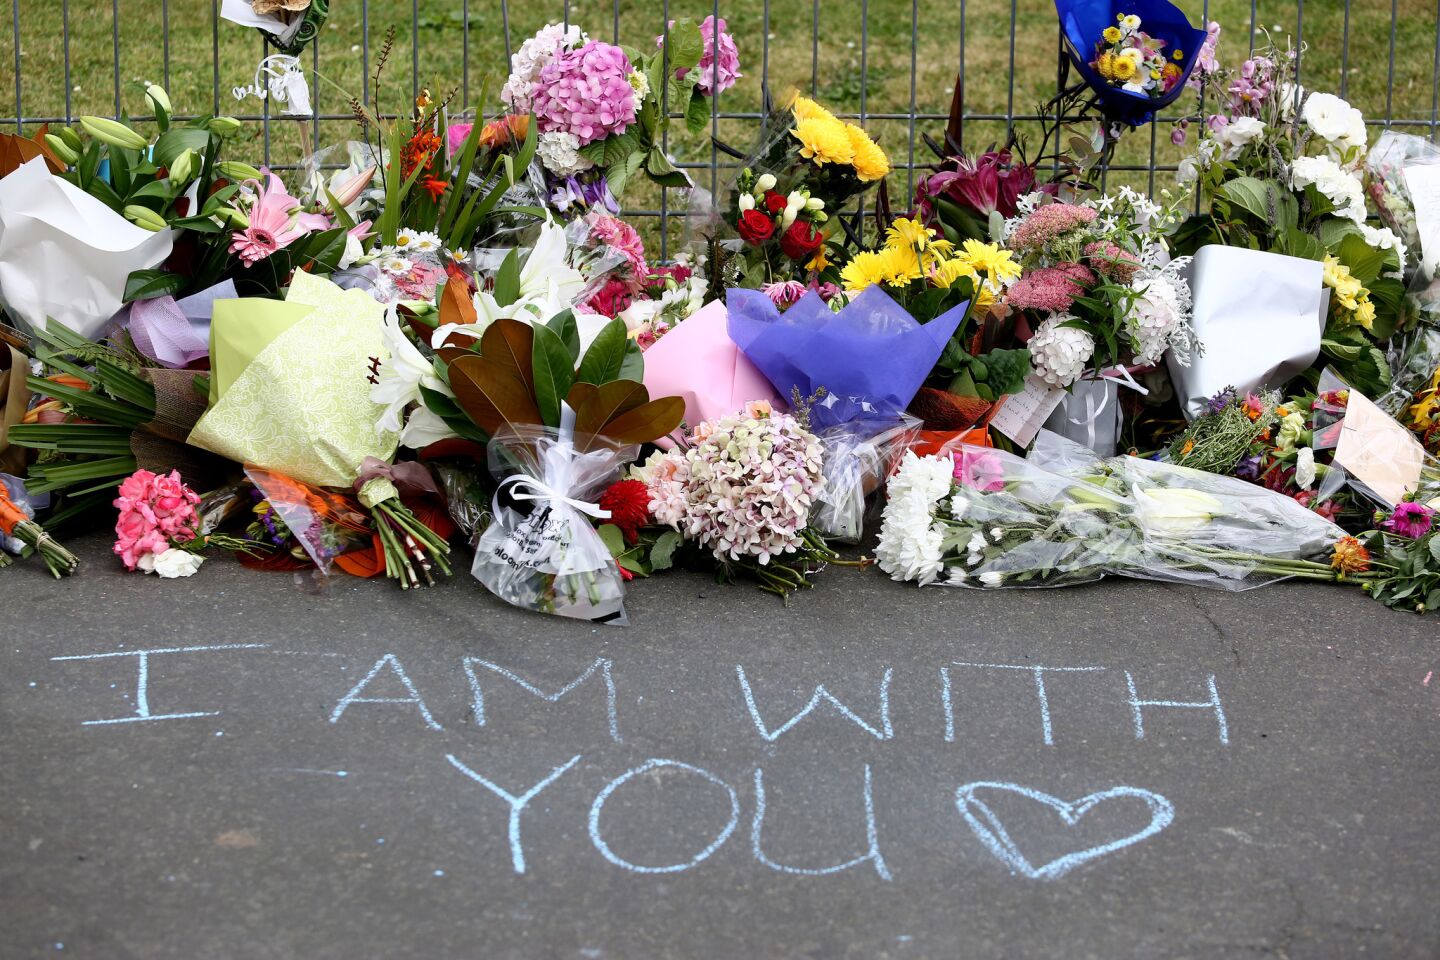 Dunedin residents leave flowers and messages at a local mosque in tribute to Christchurch victims.